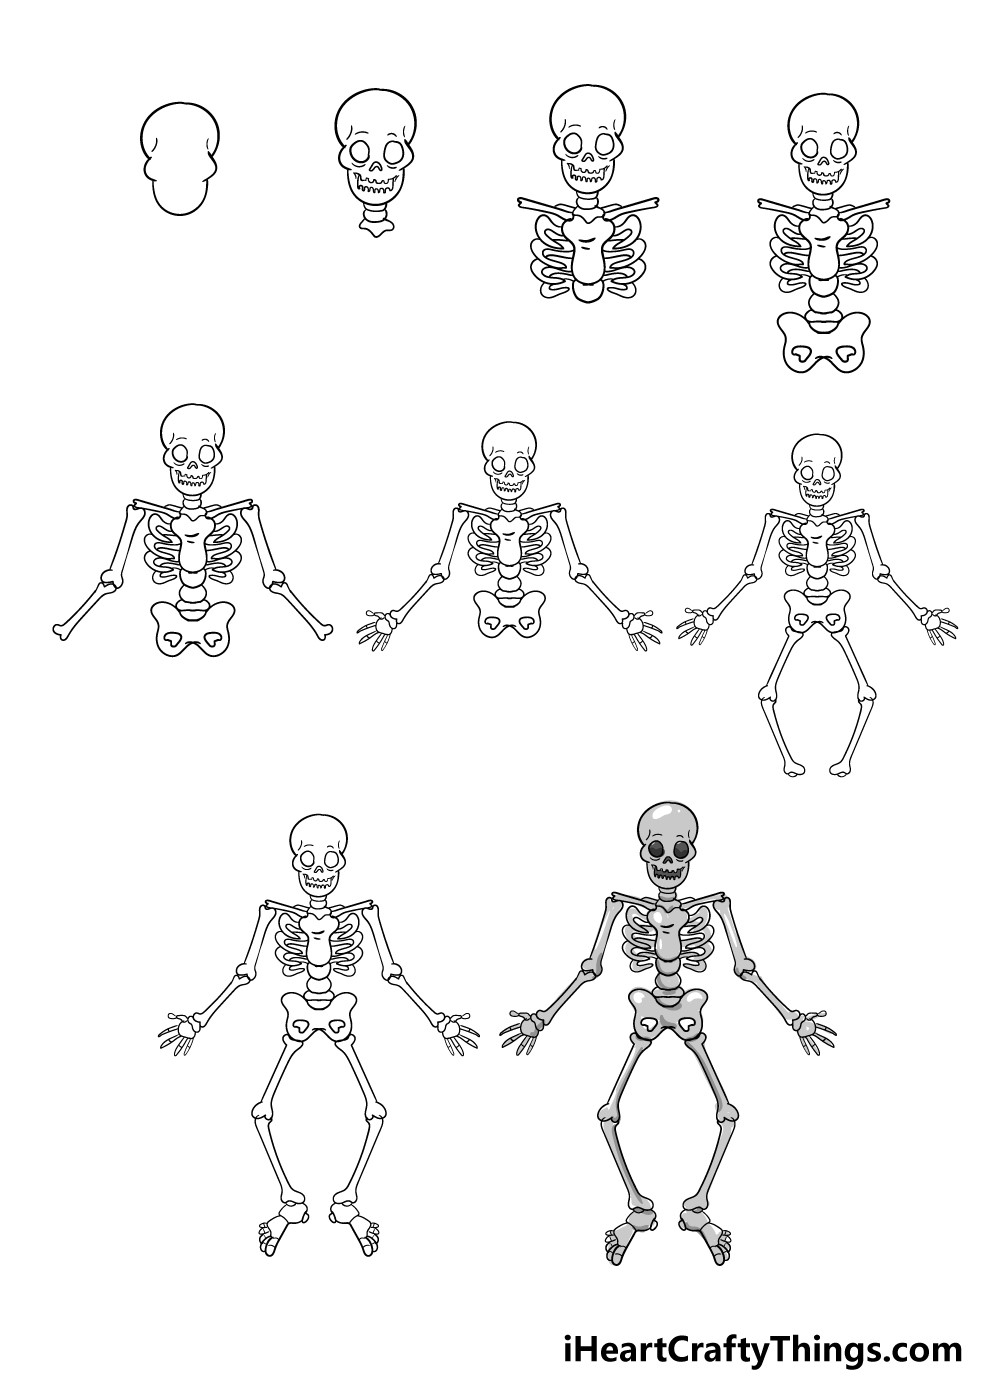 Skeleton Coloring Pages - Free & Printable!